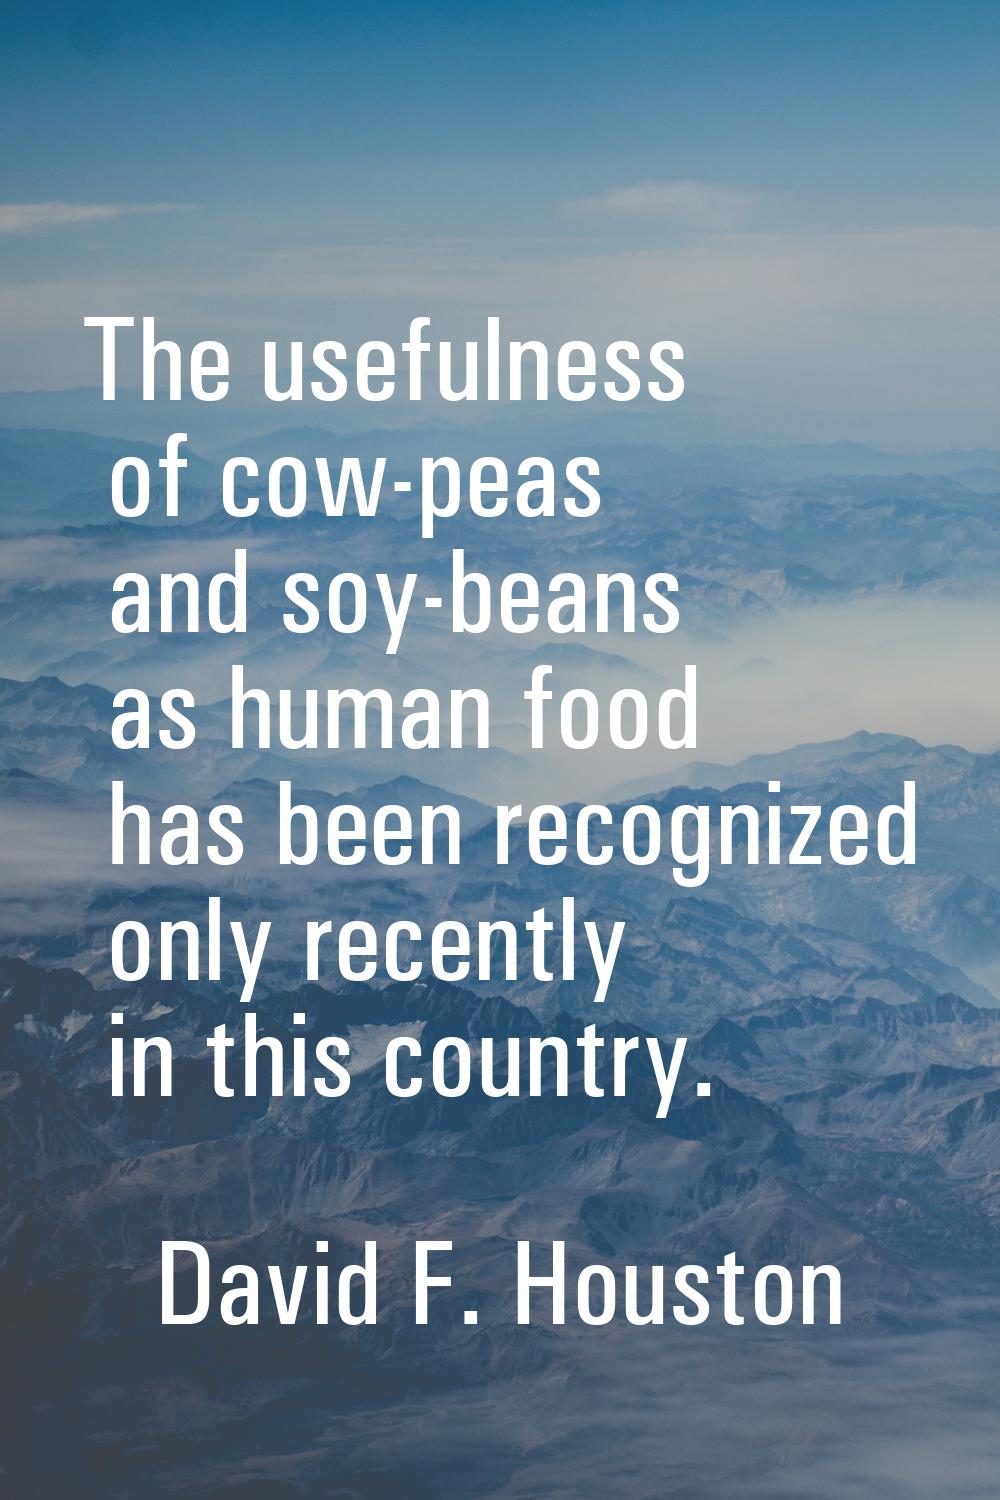 The usefulness of cow-peas and soy-beans as human food has been recognized only recently in this co